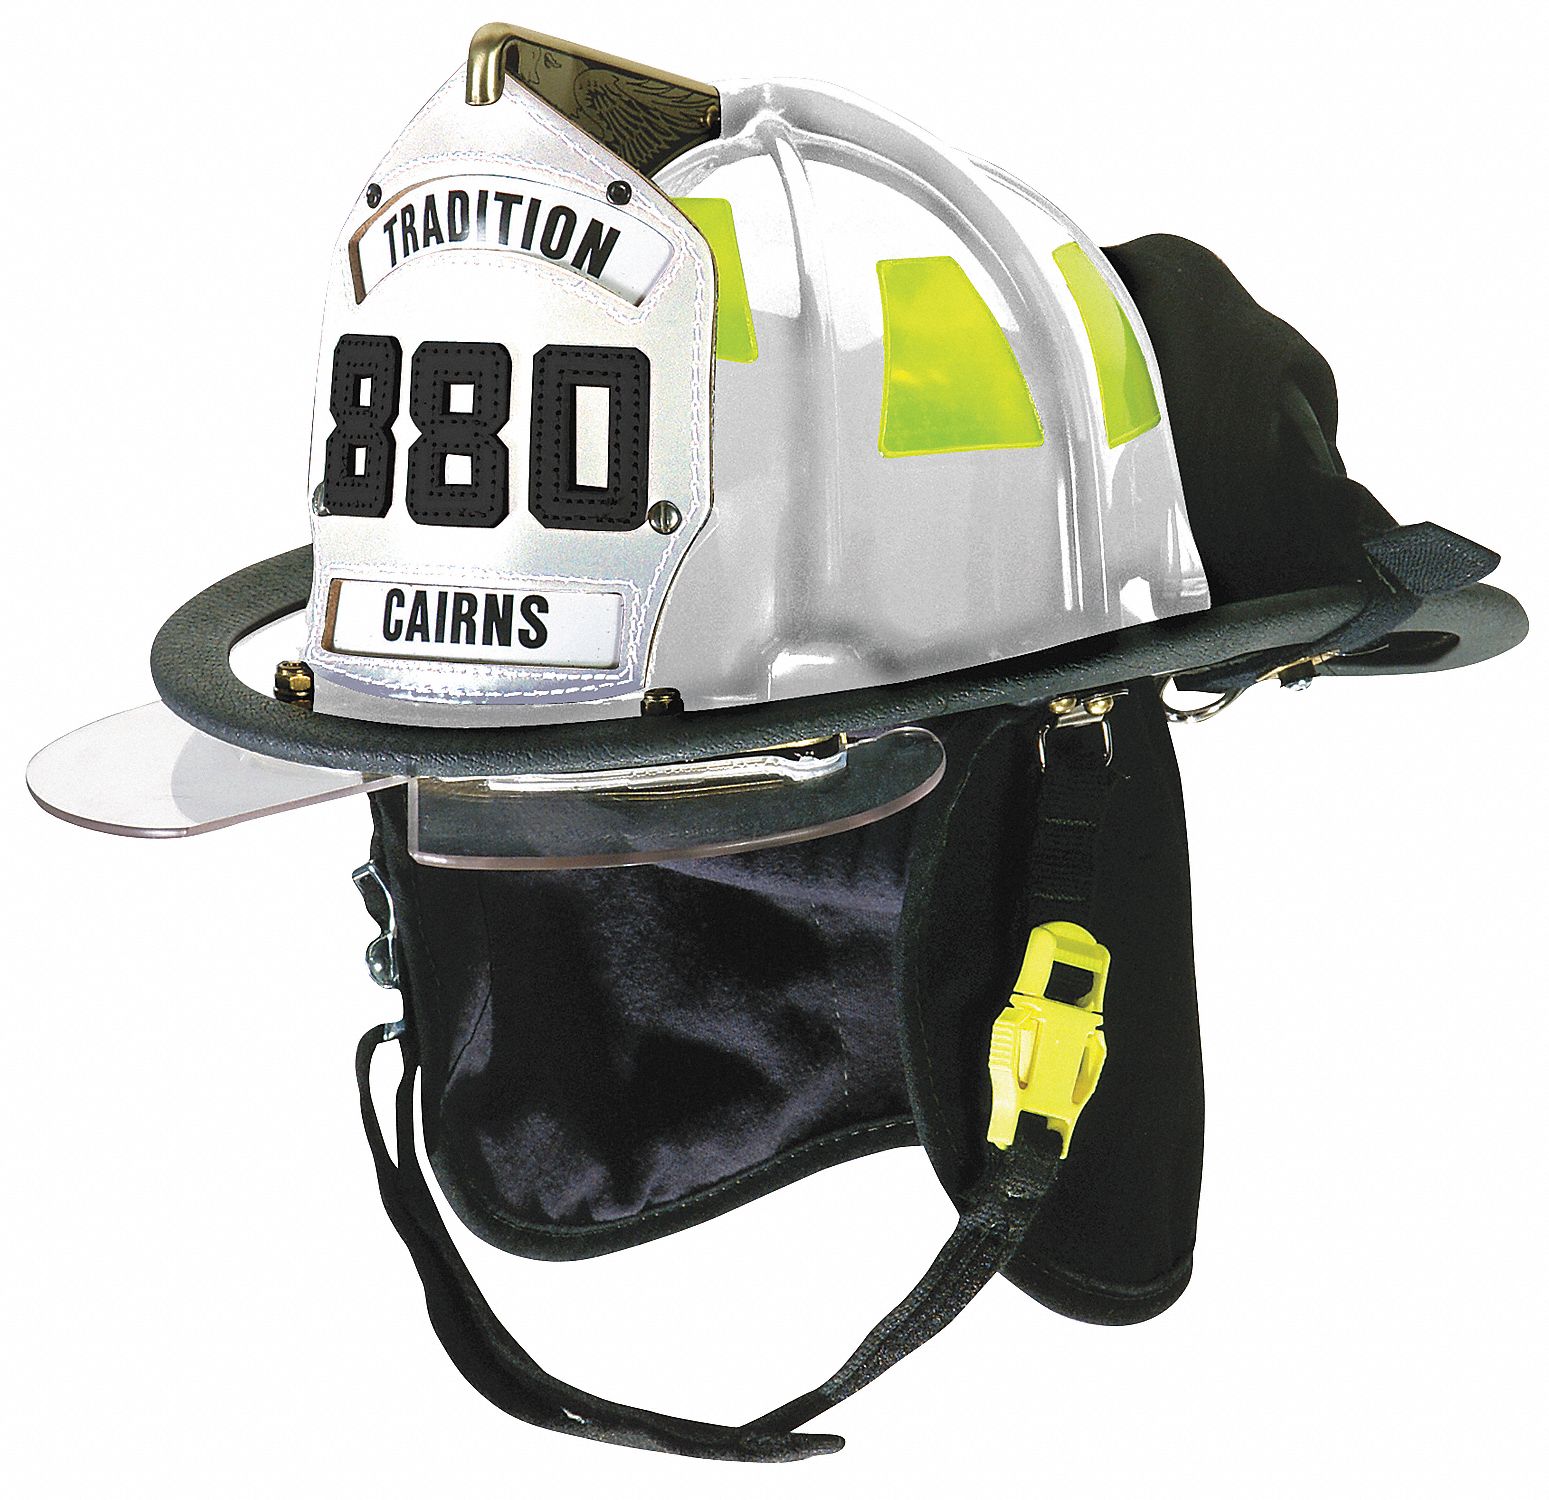 White Fire Helmet, Shell Material: Thermoplastic, Ratchet Suspension, Fits Hat Size: 5-5/8 to 7 5/8"